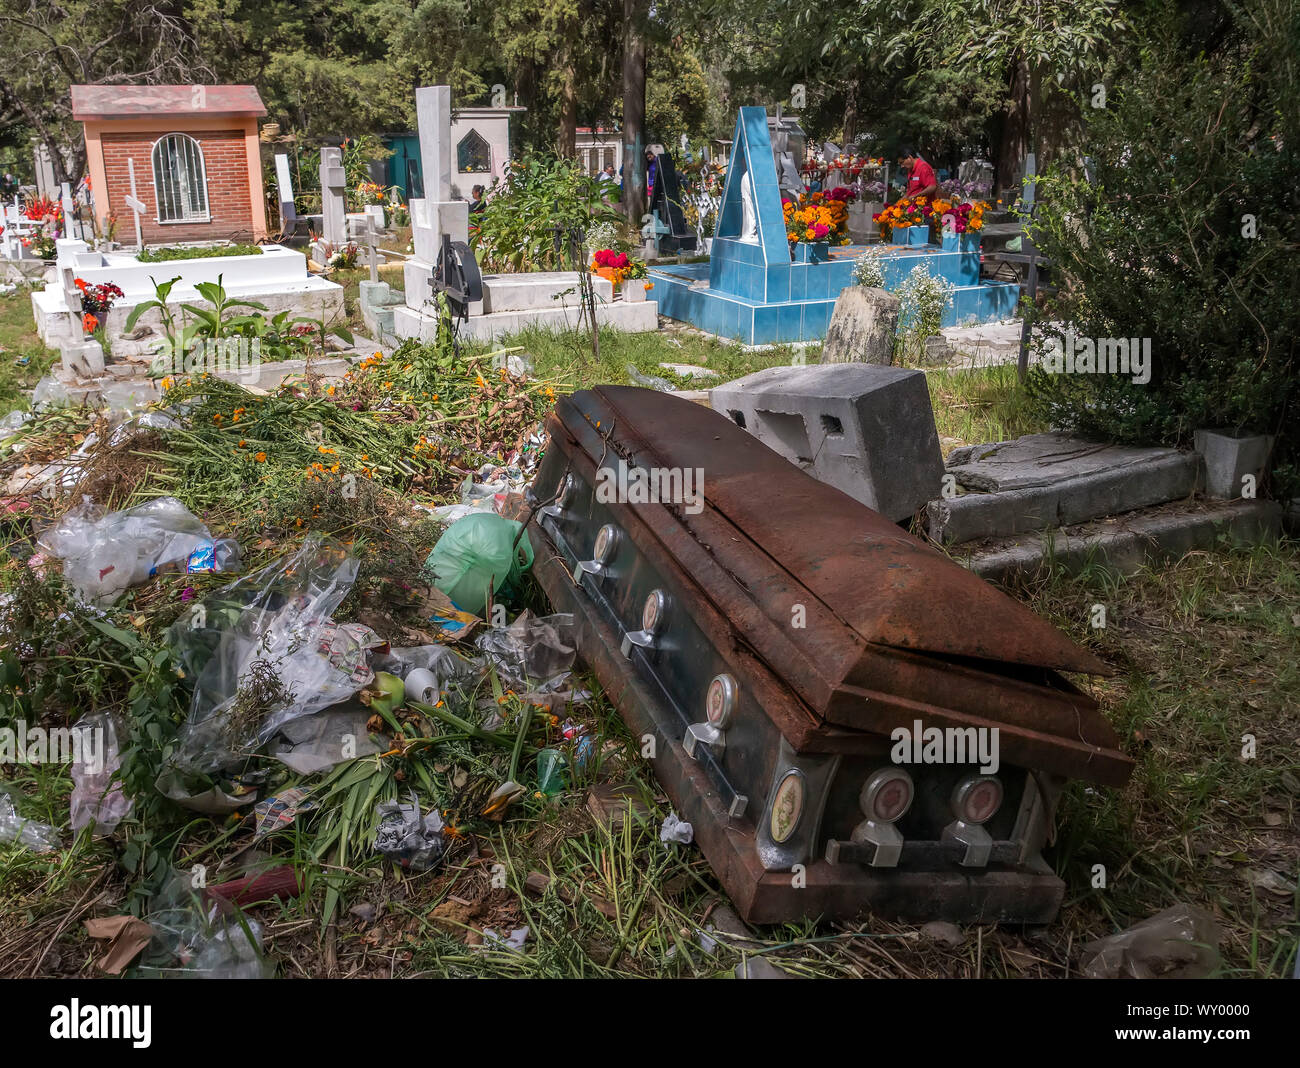 Coffin thrown out with trash in clean up of cemetery for the Day of the Dead in Mexico City, Mexico Stock Photo